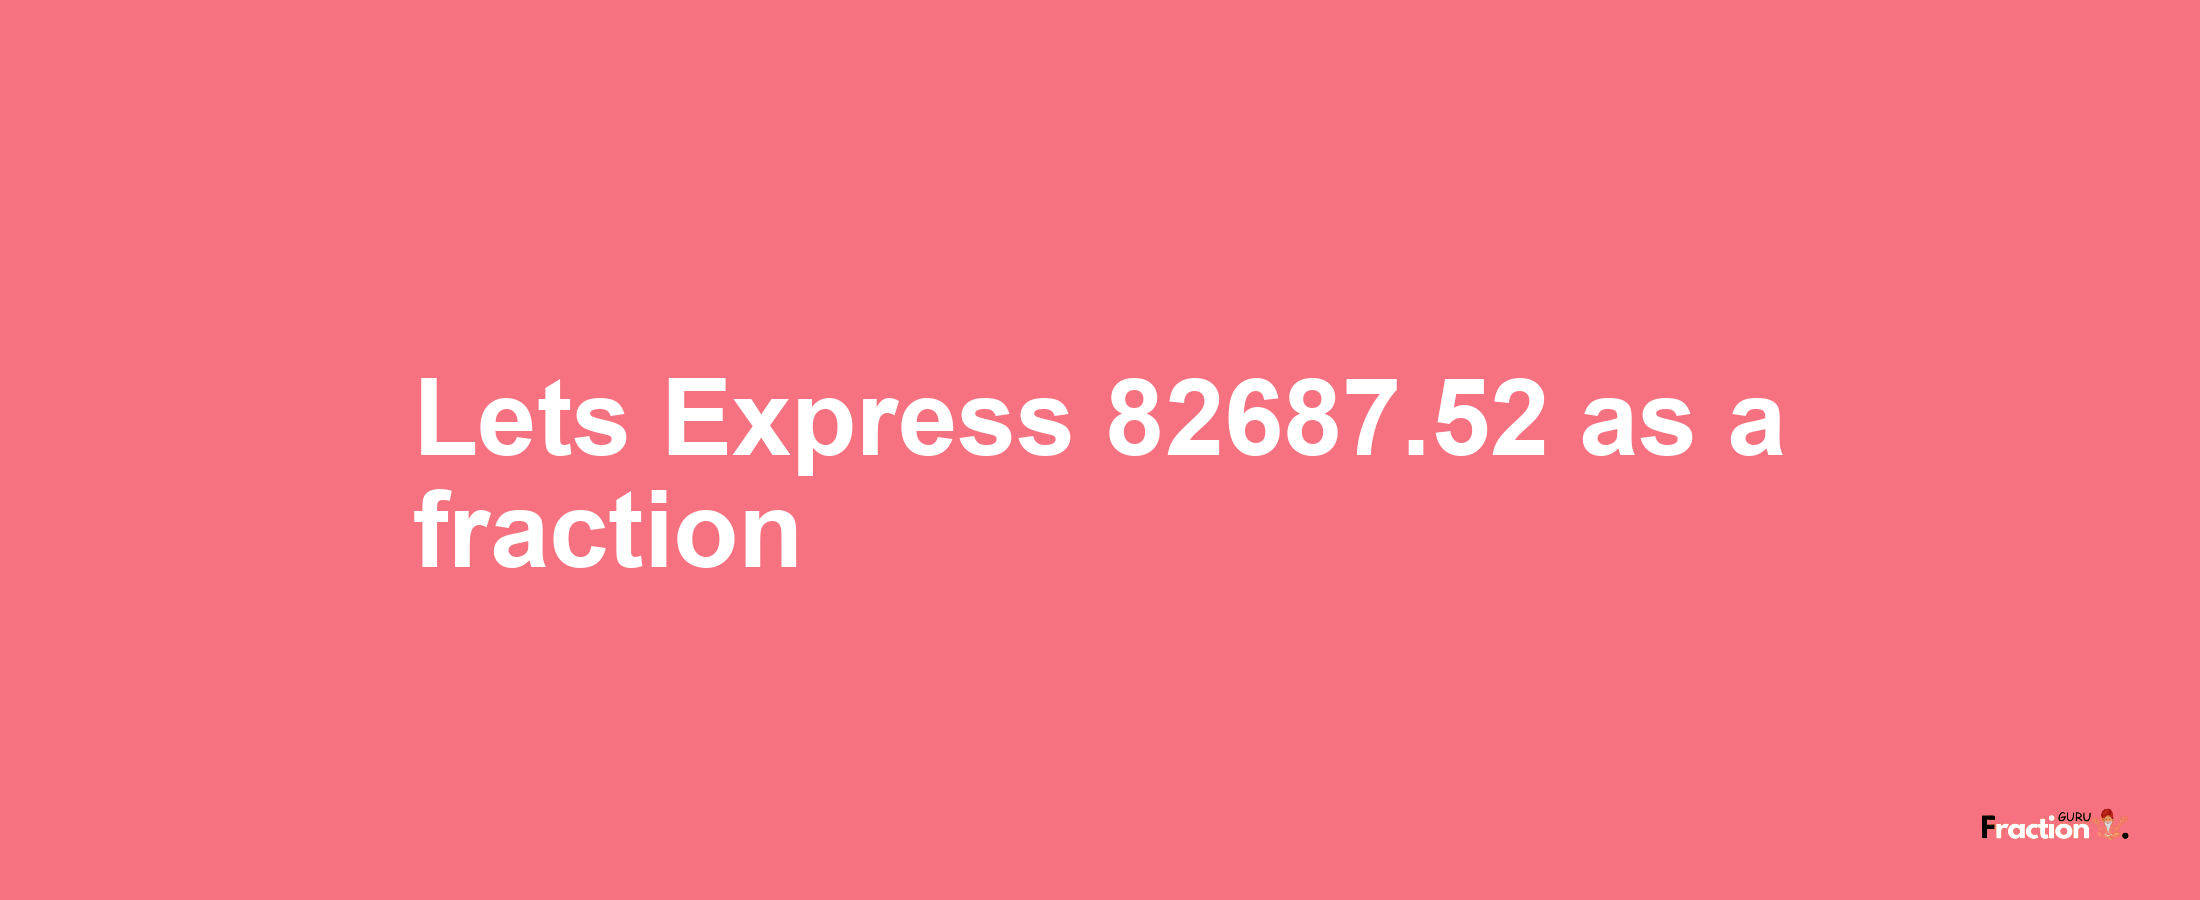 Lets Express 82687.52 as afraction